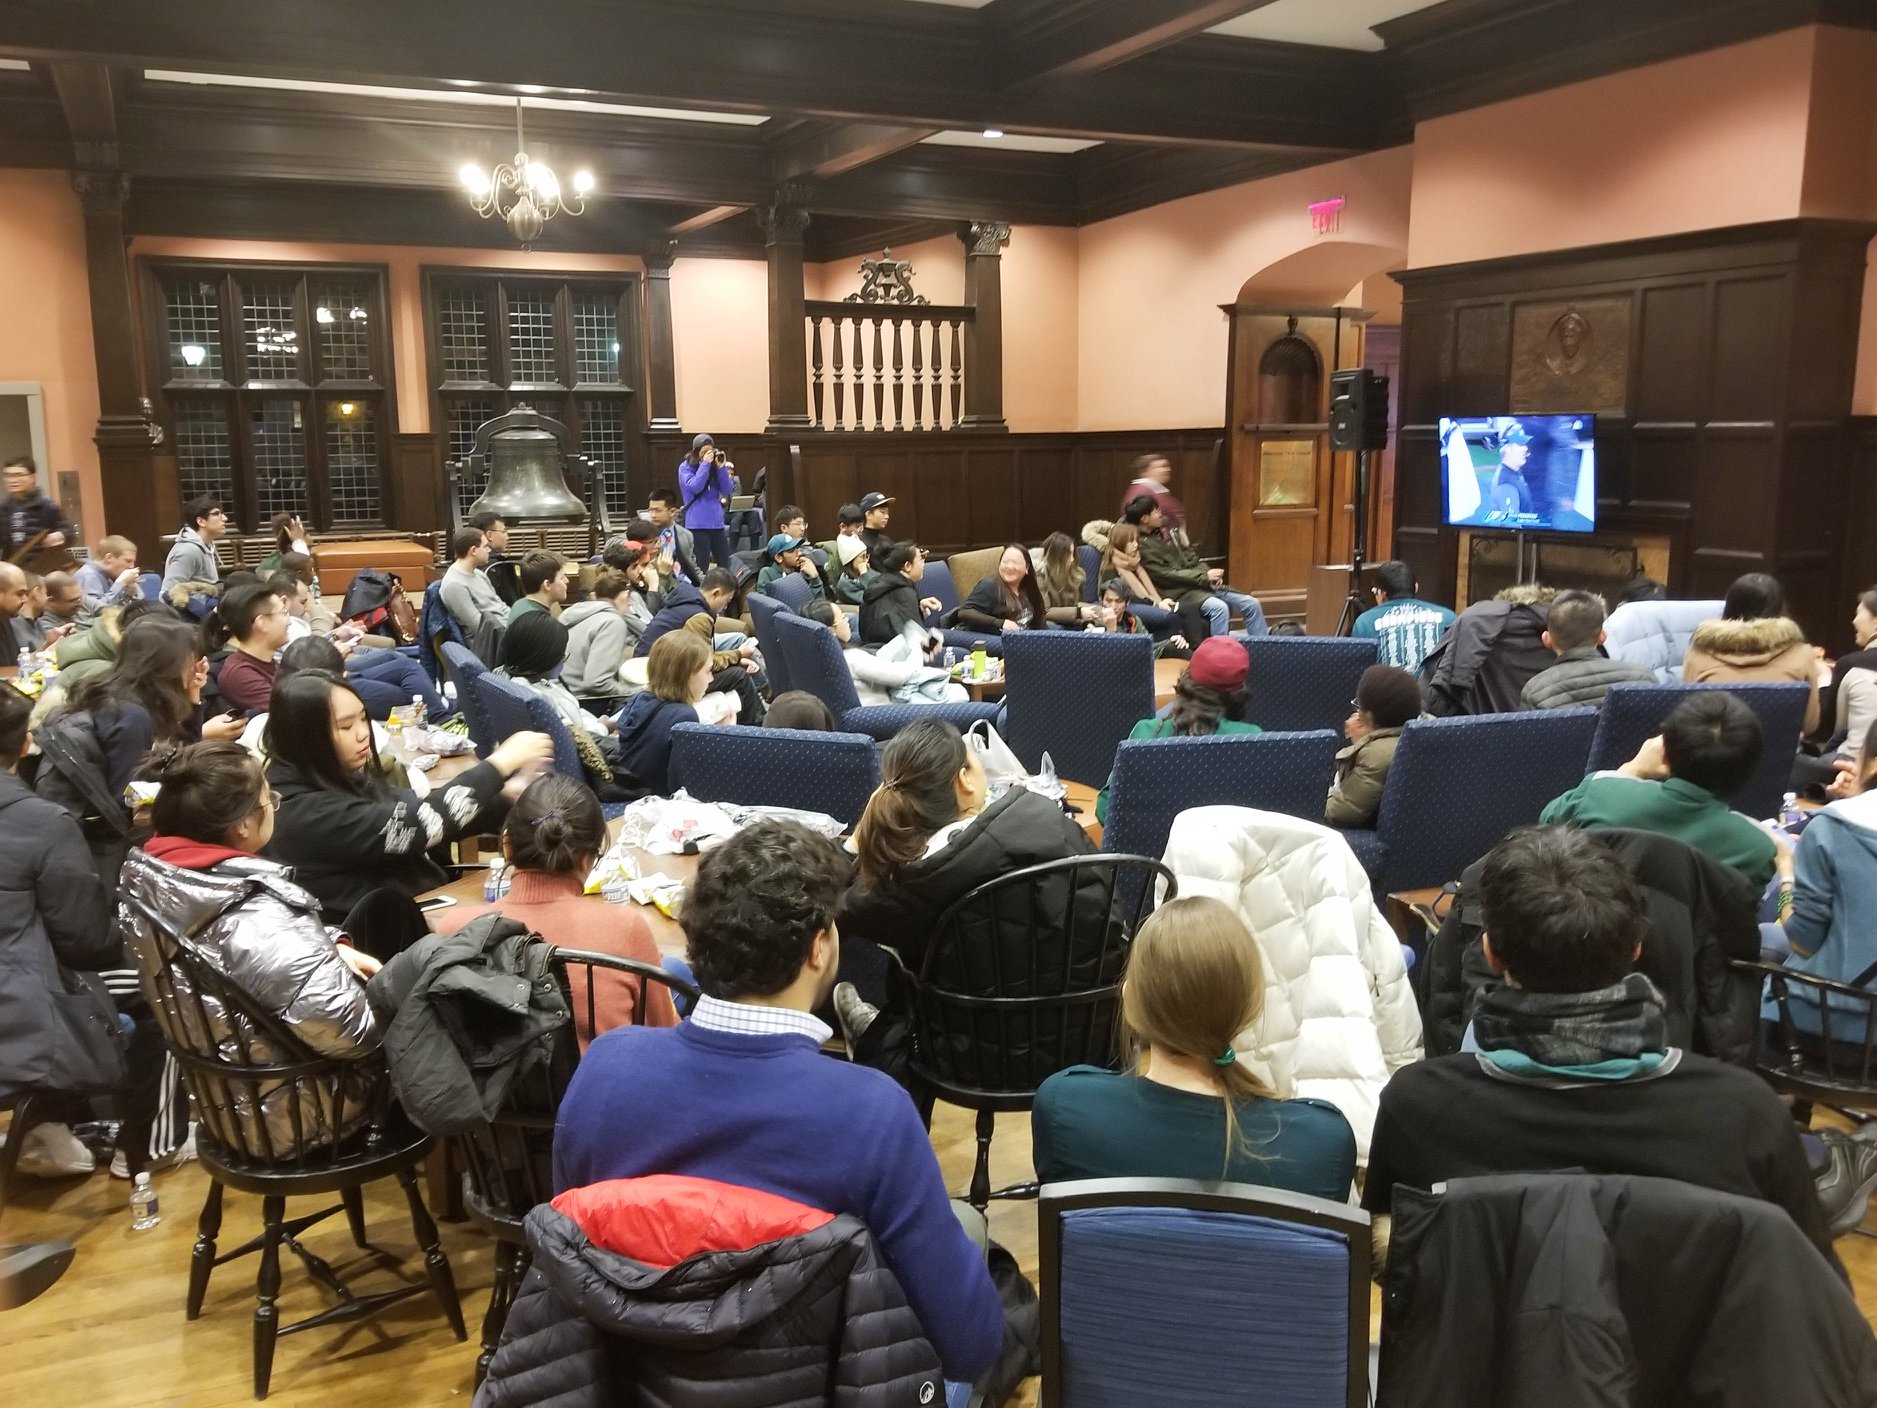 A crowd of Penn Students gather around a TV in the Penn Reading room to watch the Eagles play in the Super Bowl